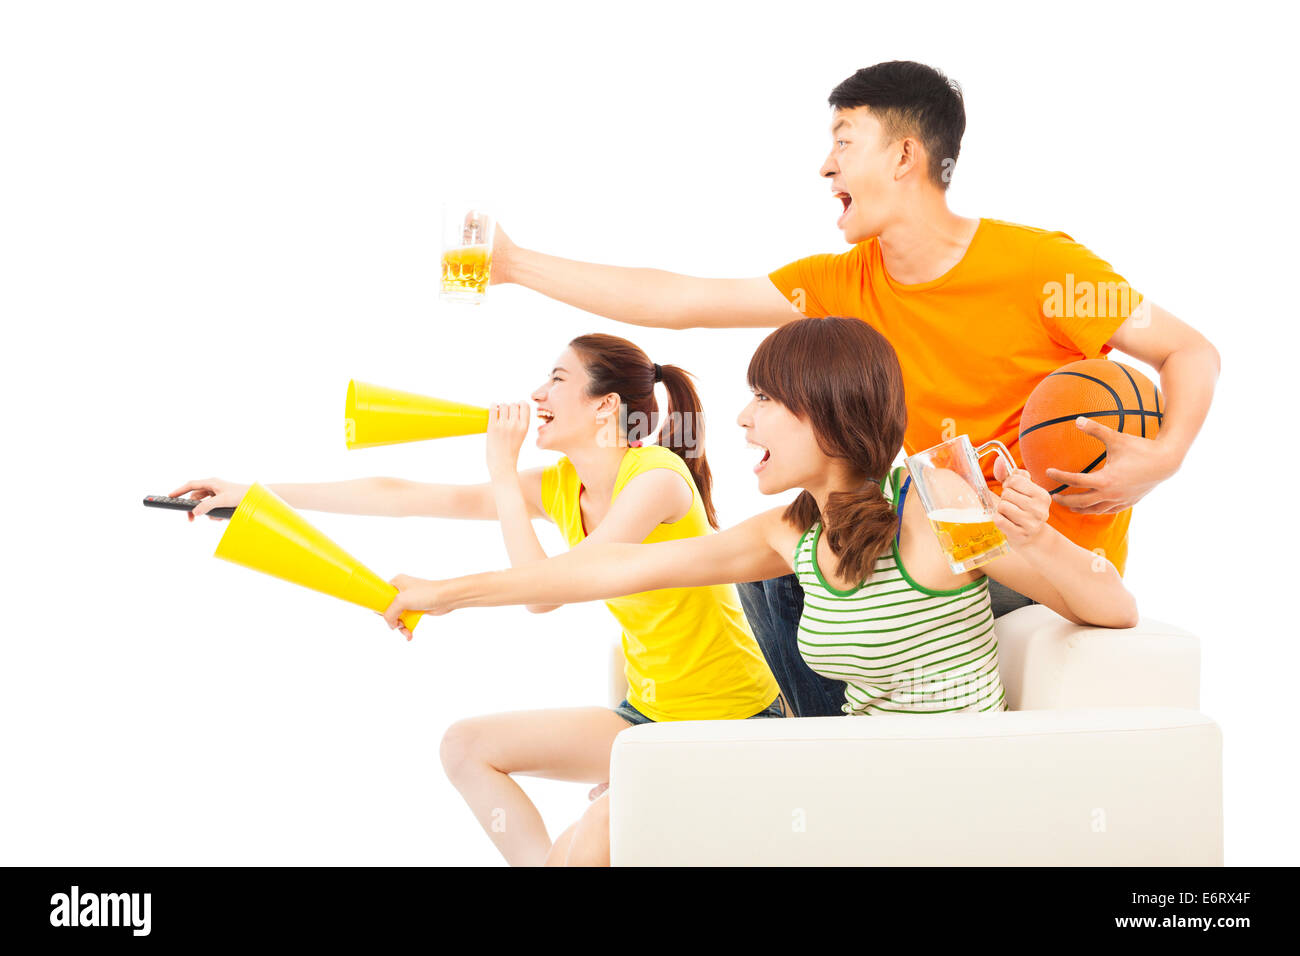 young people so excited to yelling and while watching ball game Stock Photo